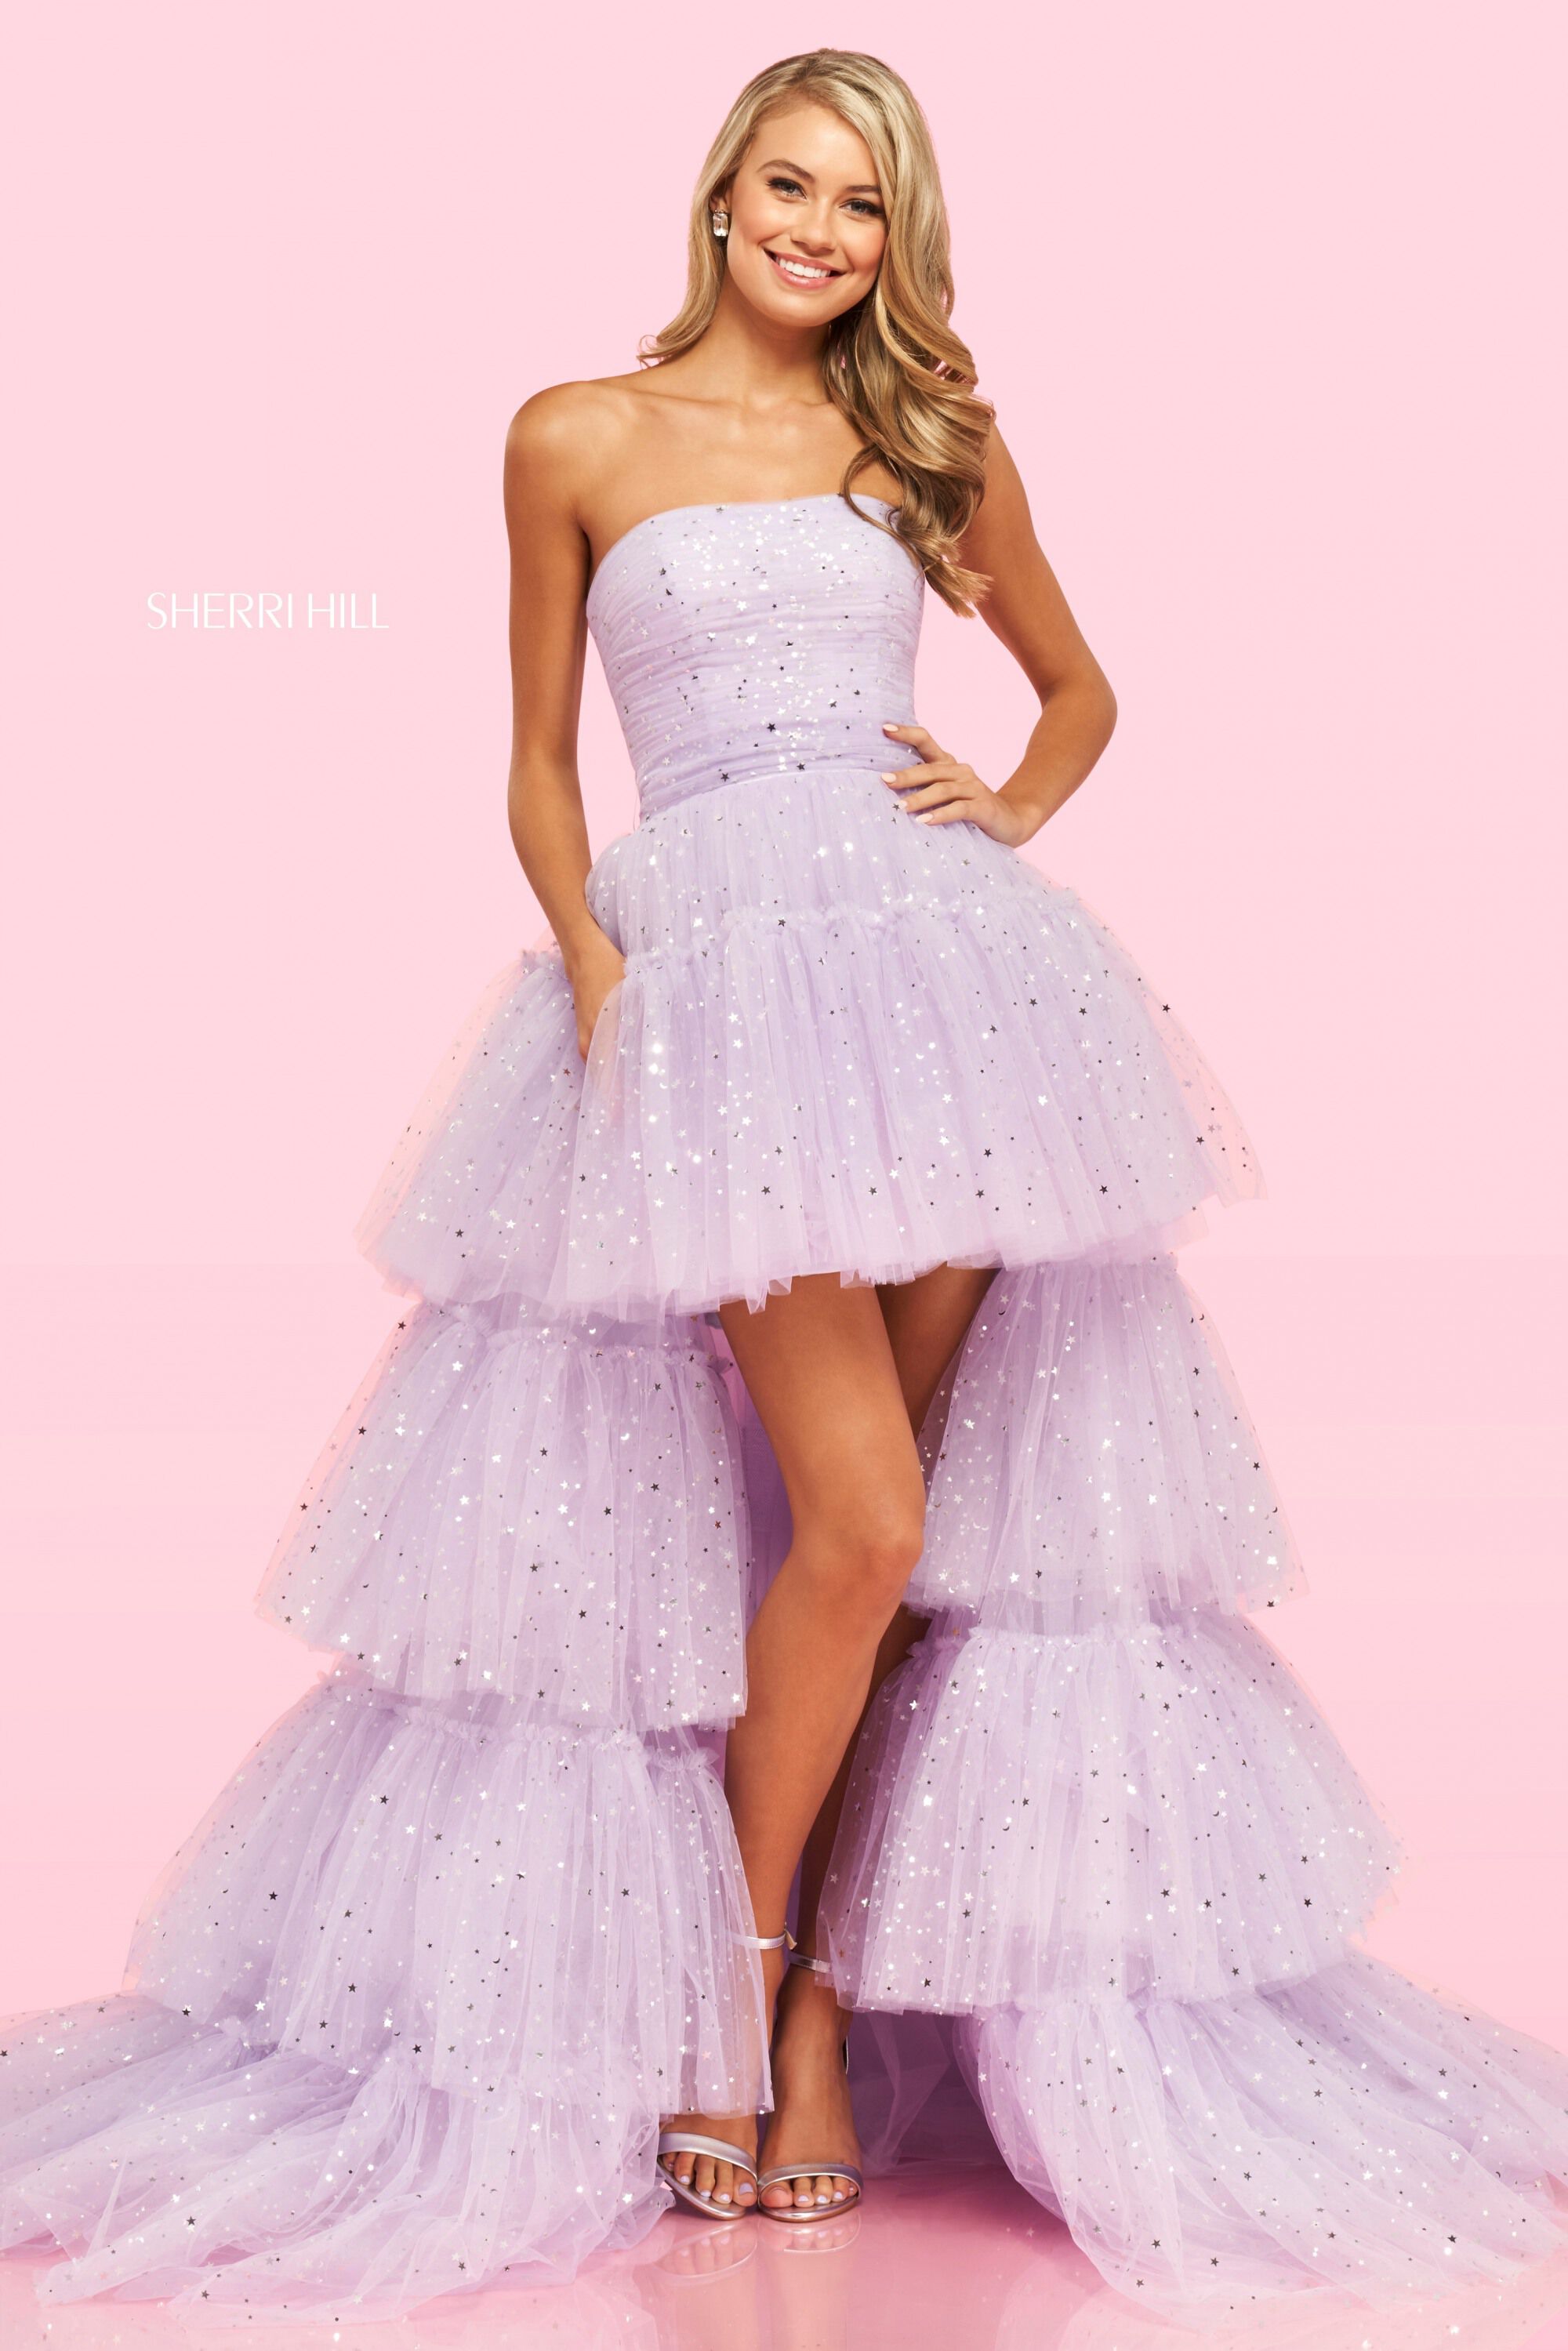 style № 54222 designed by SherriHill